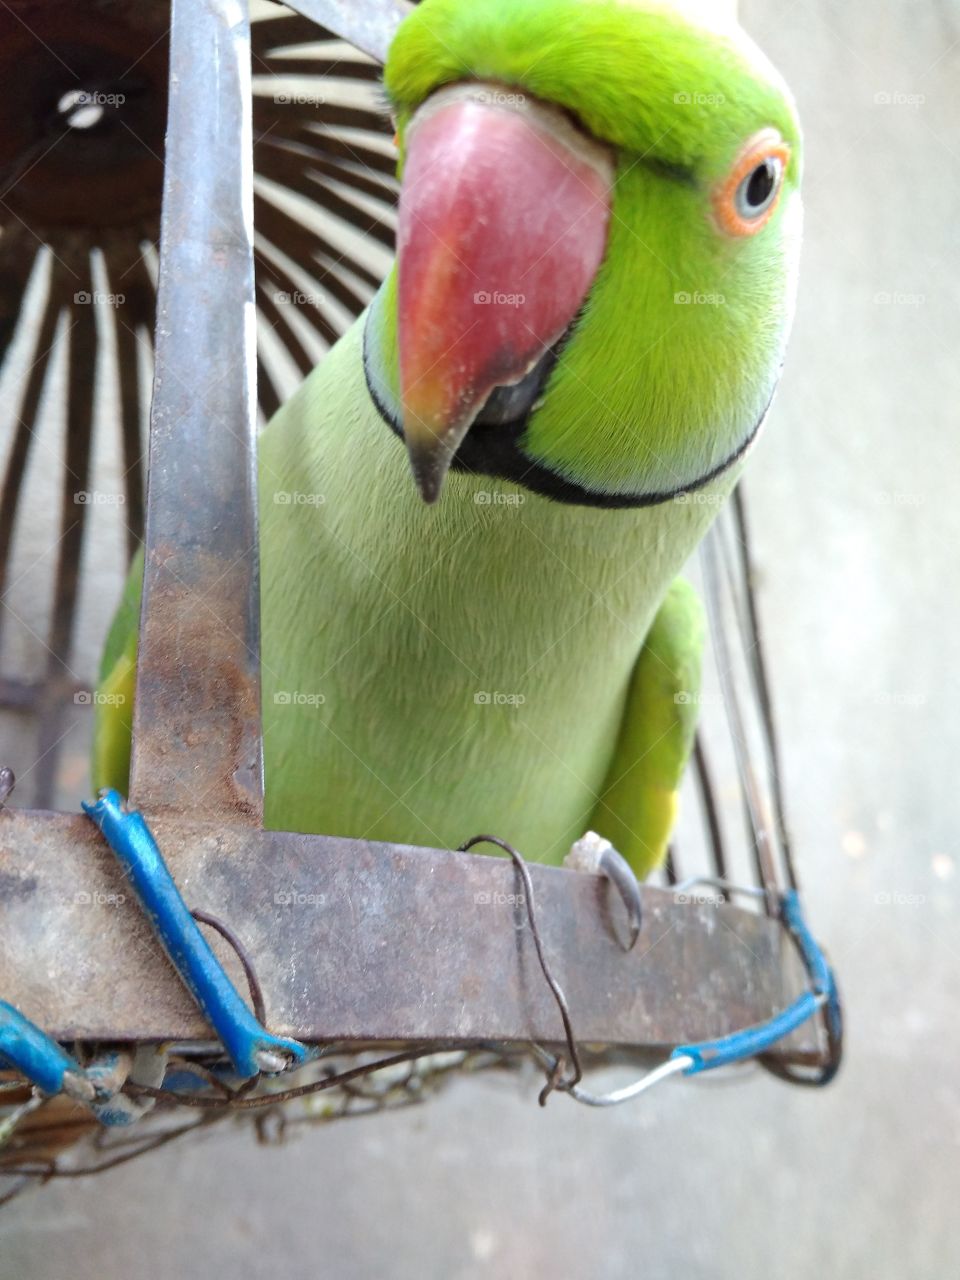 It's my photos I pic with my cemra. Its my underground in my house. Its sweet parrot I love its